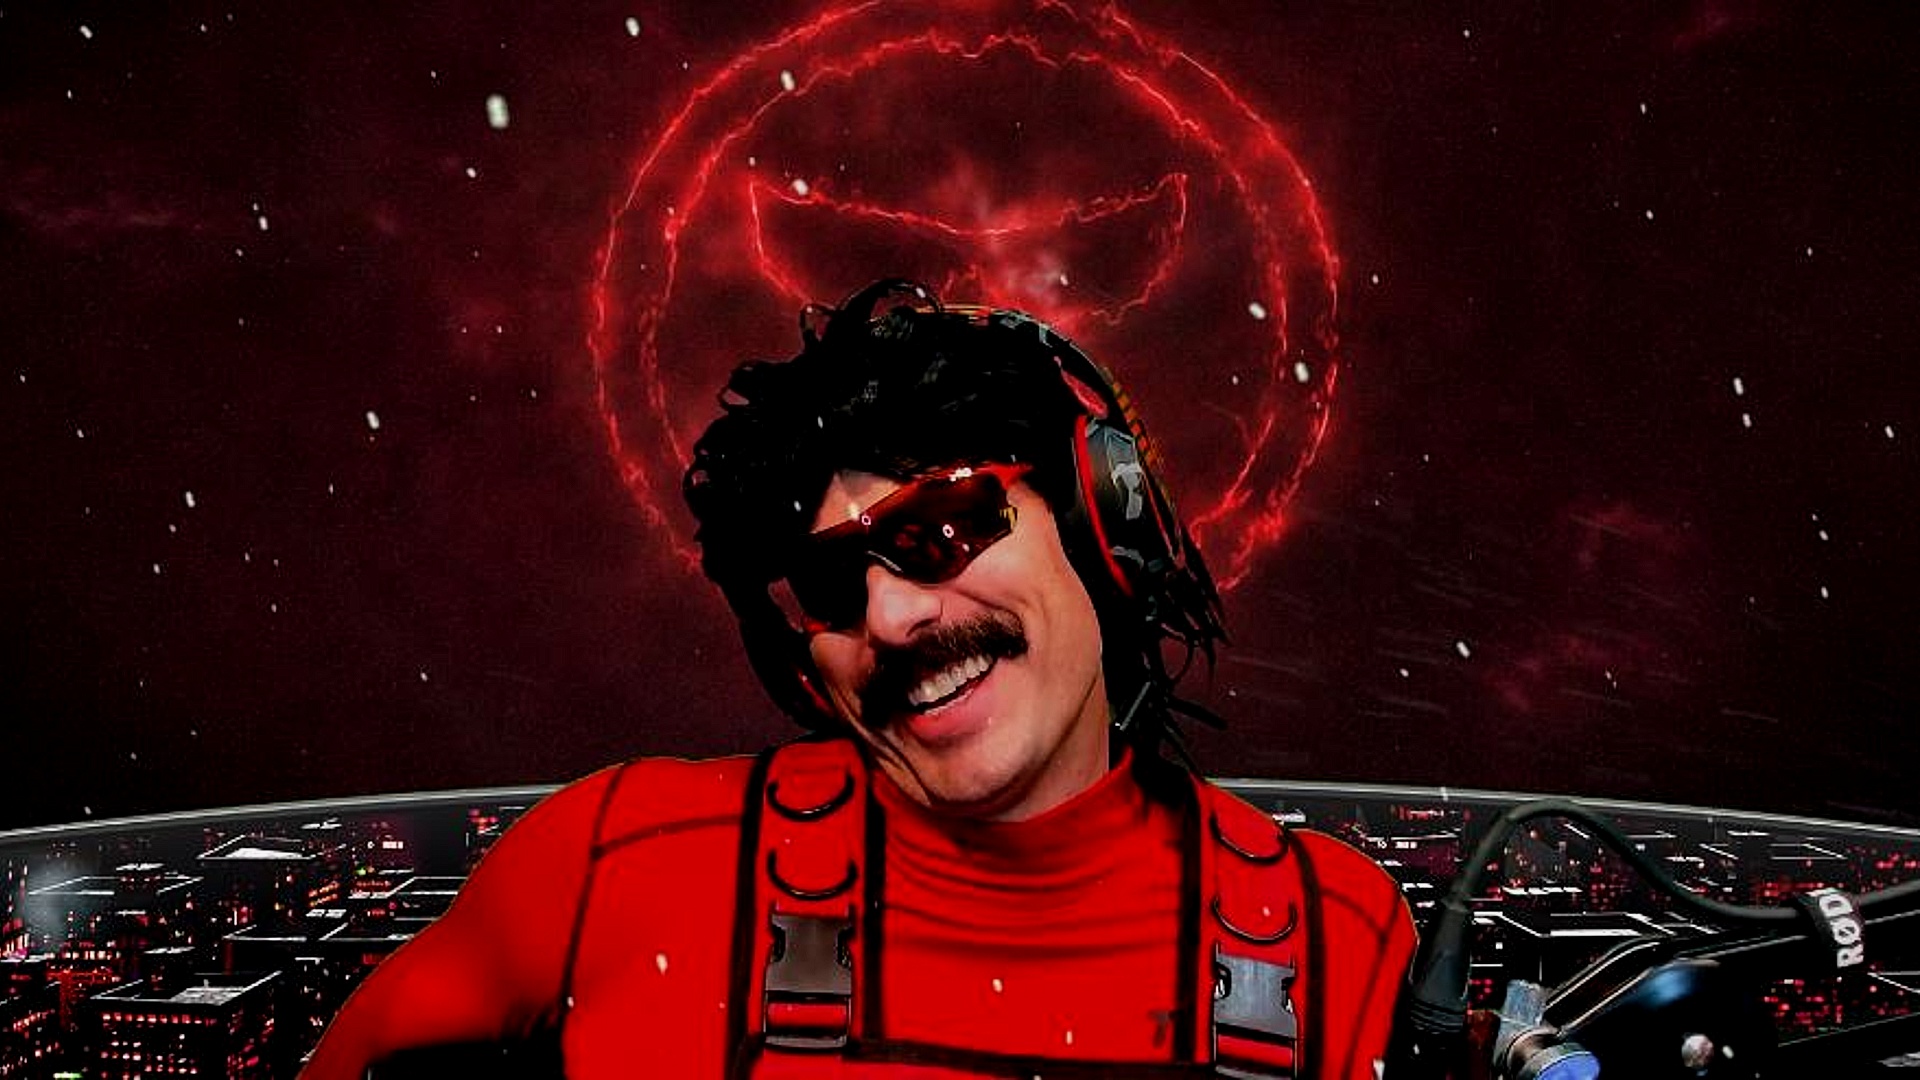 Dr DisRespect blasts Overwatchs heroes and AI in 